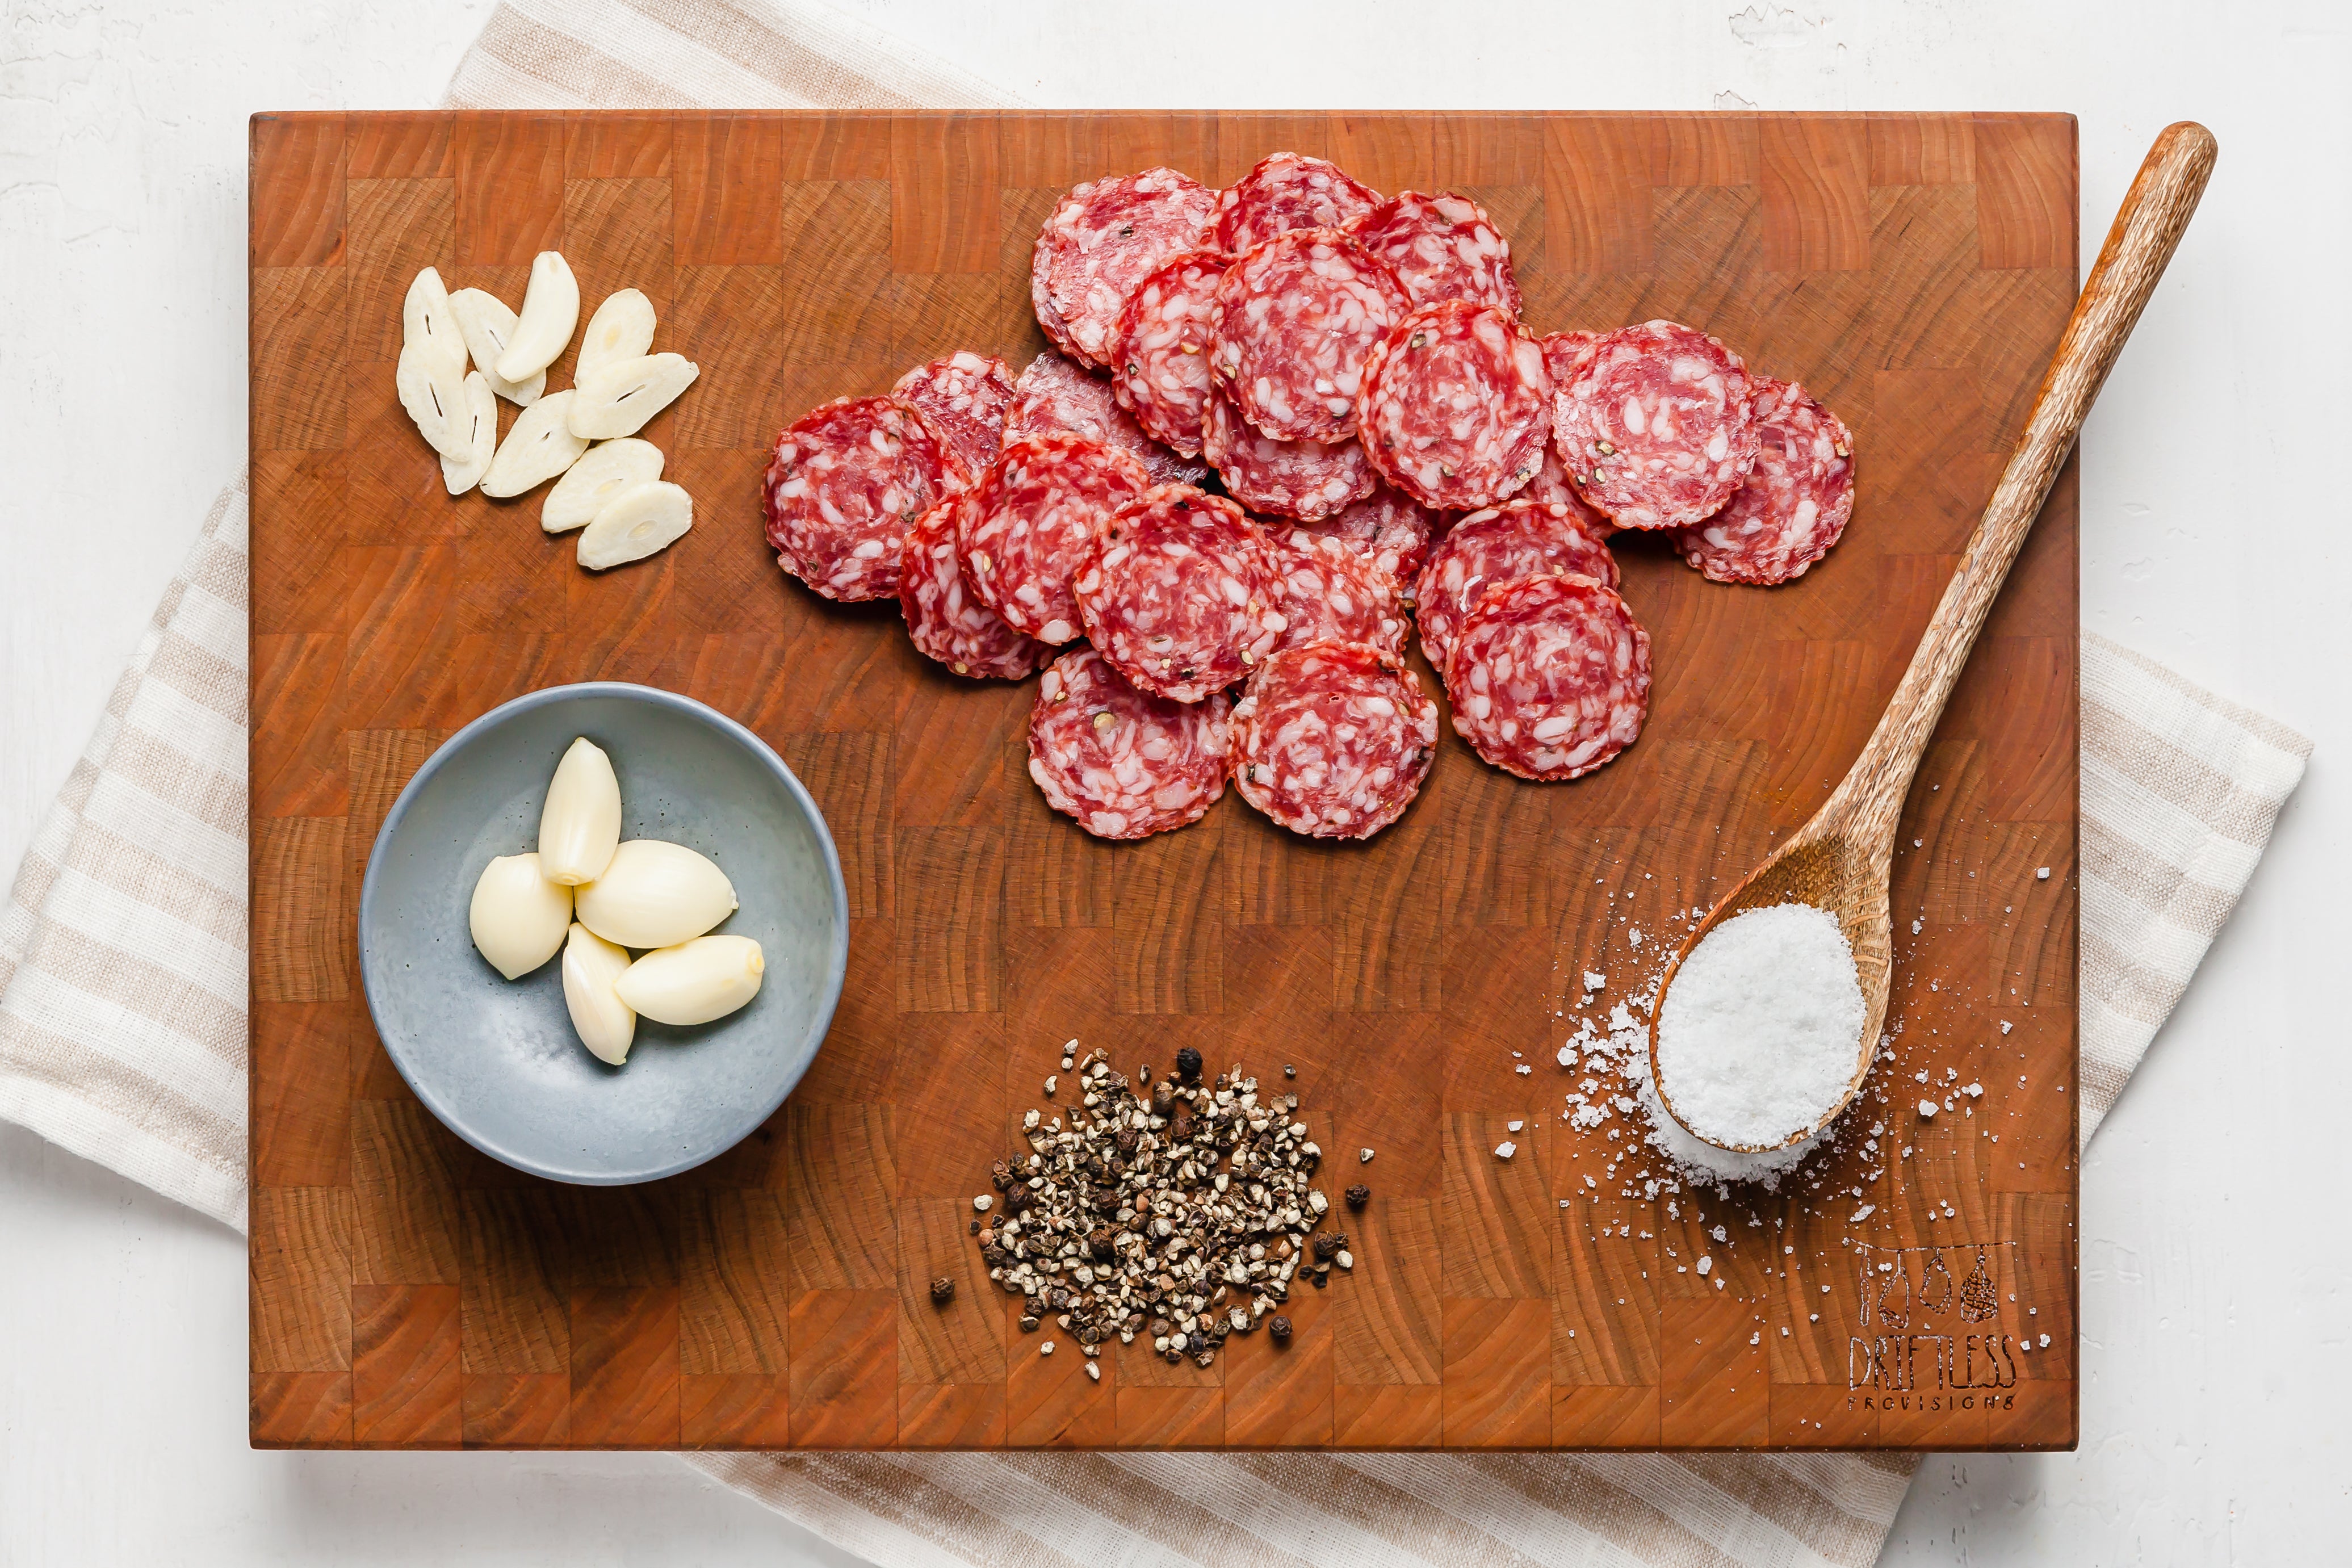 Saucisson Sec Handcrafted, Old World Charcuterie – Driftless